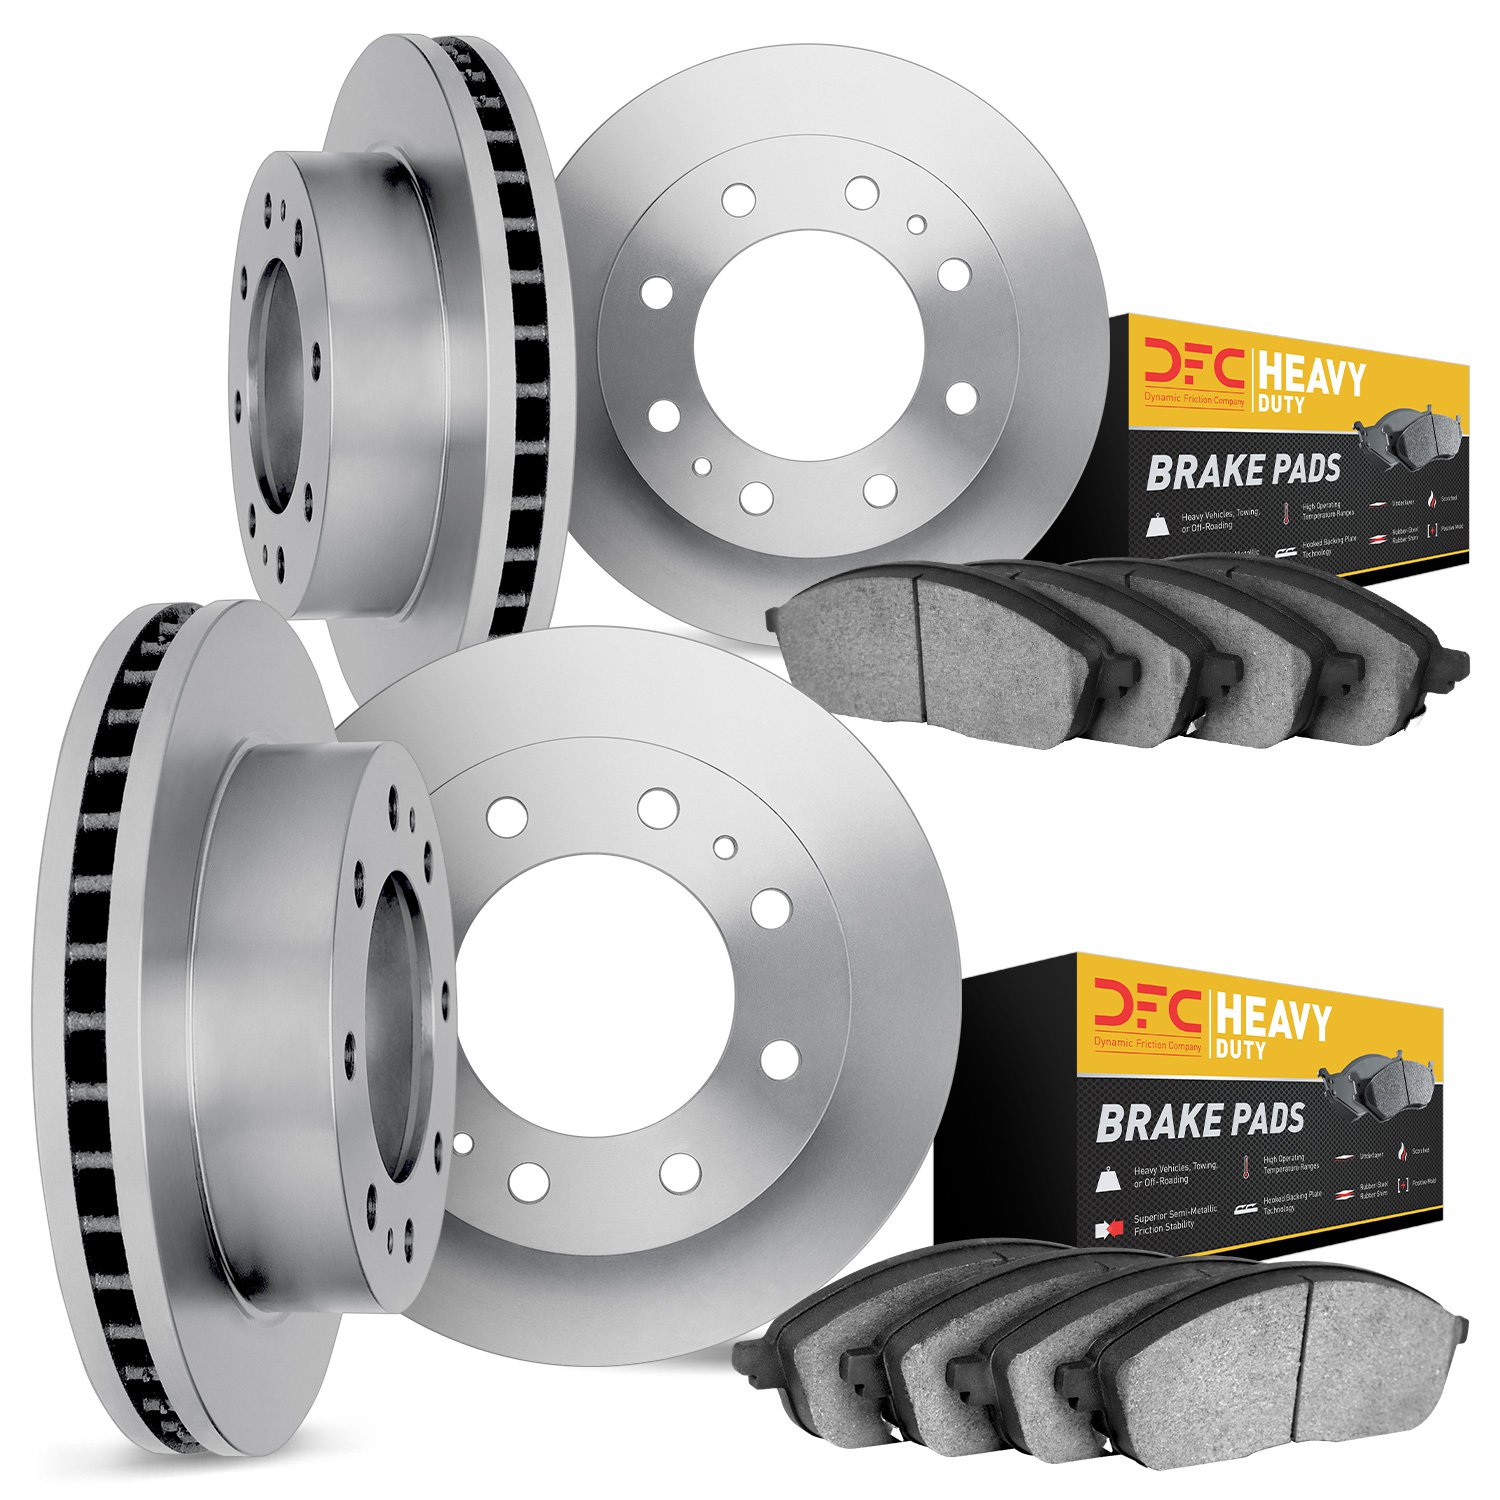 6204-48461 Brake Rotors w/Heavy-Duty Brake Pads Kit, 2003-2008 GM, Position: Front and Rear